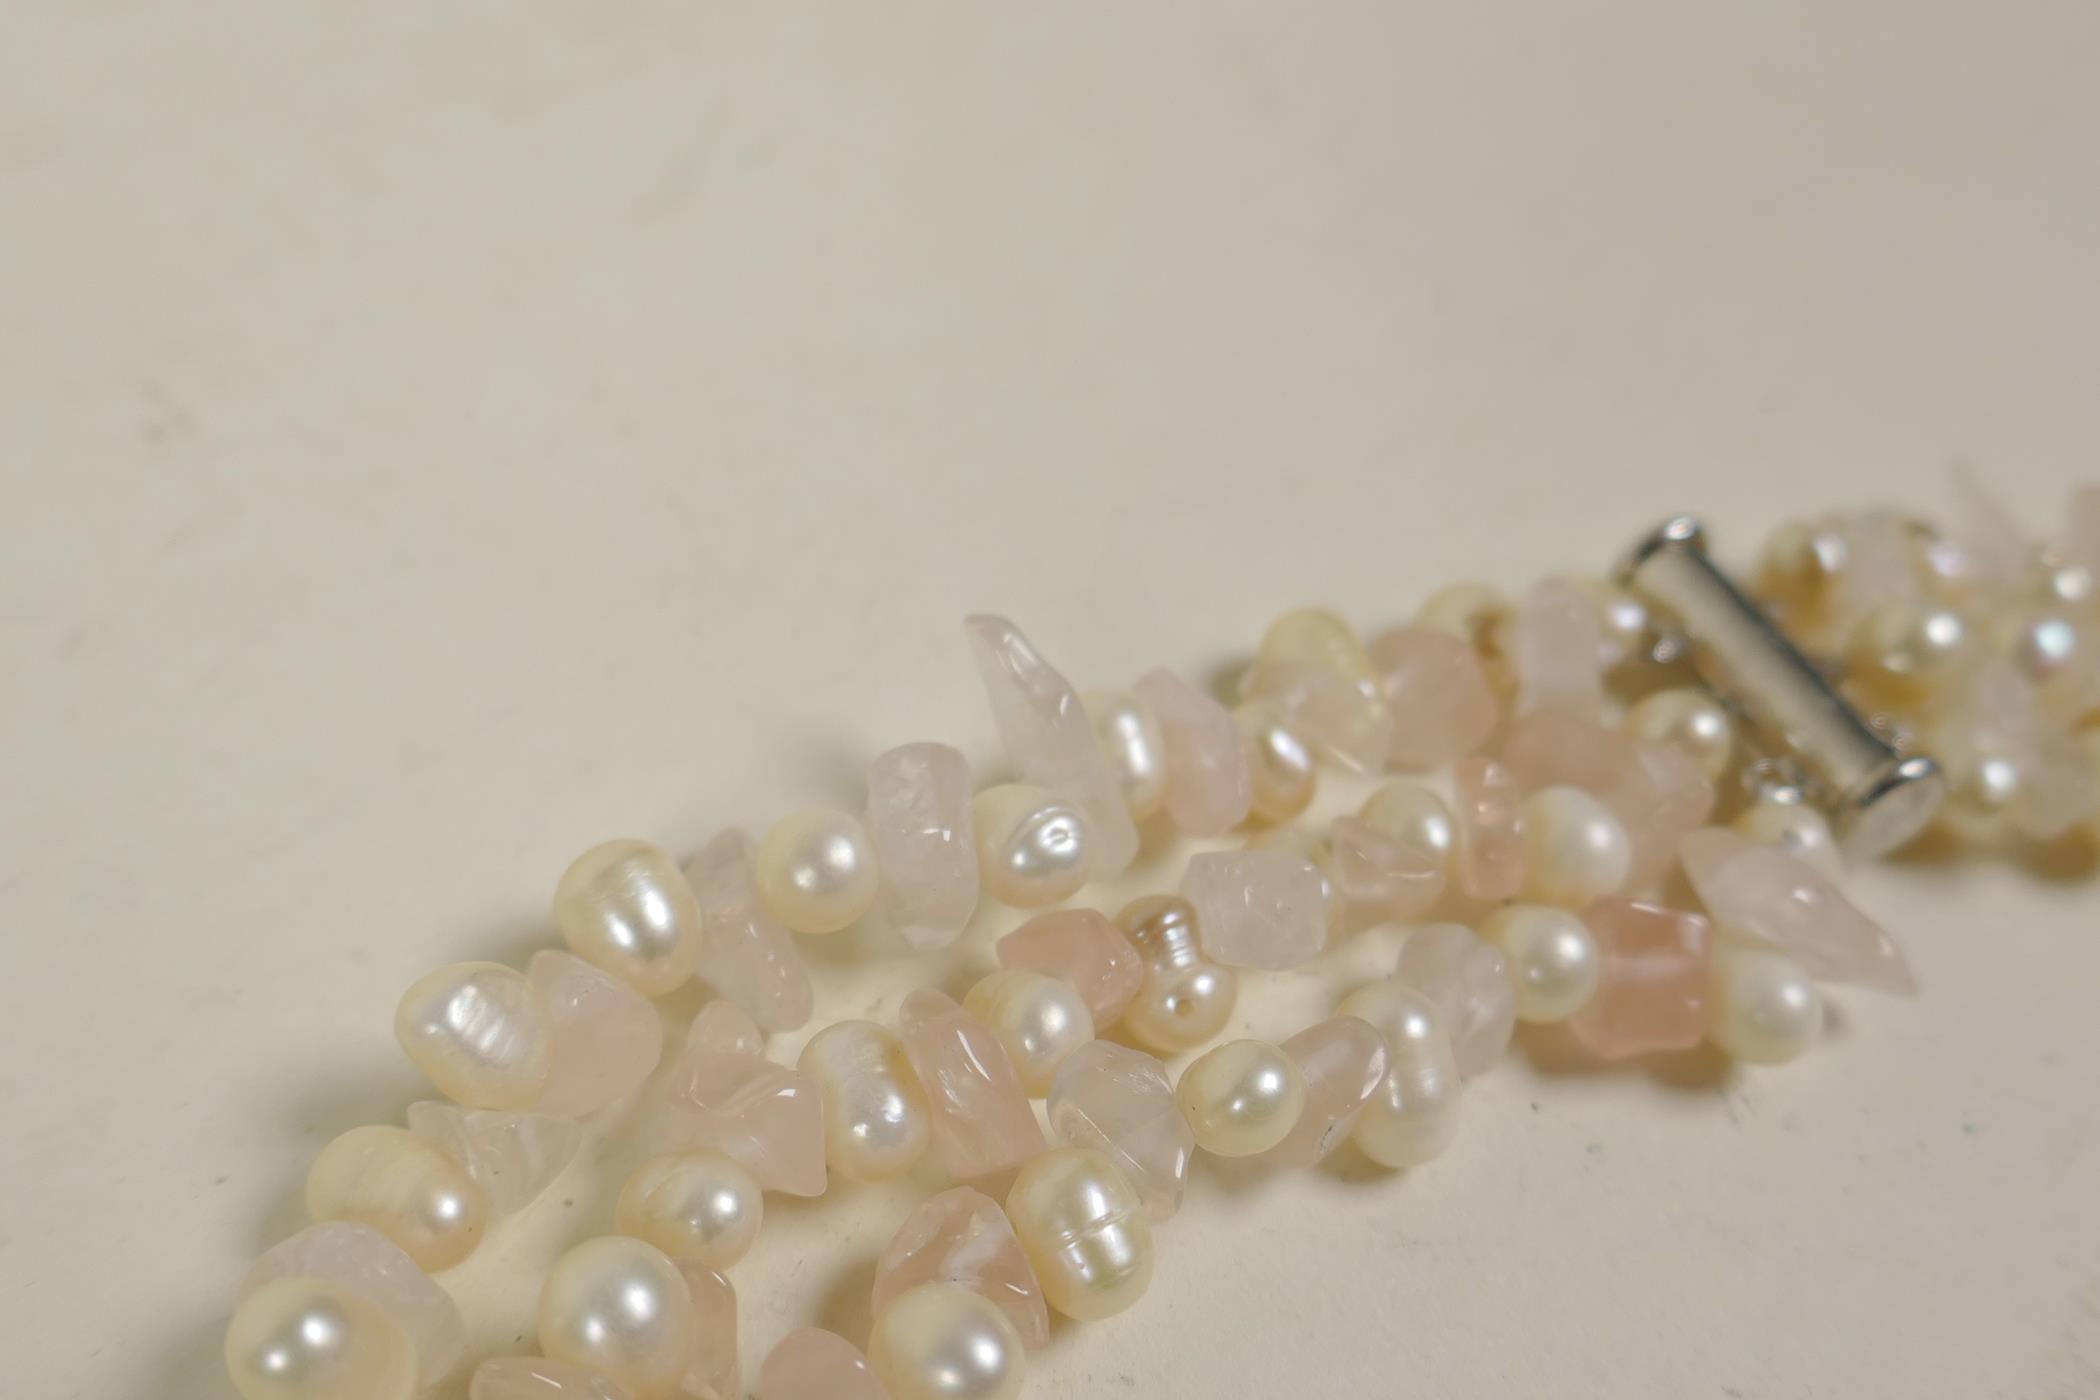 A freshwater pearl and rose quartz triple strand necklace, 18" long - Image 3 of 3